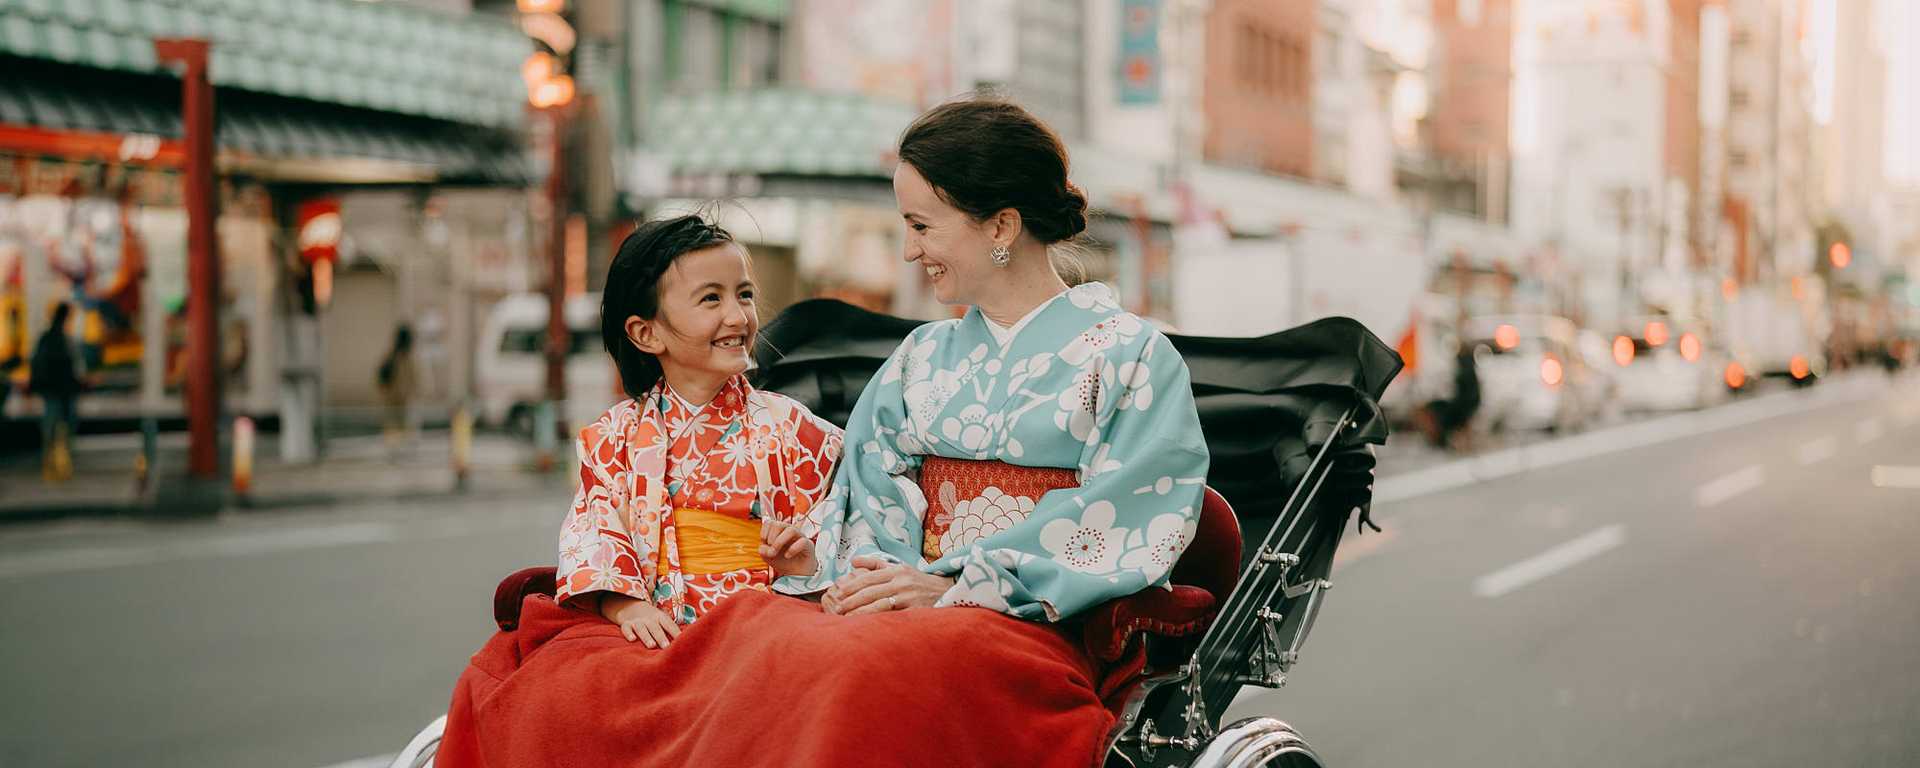 mother and young daughter in kimono, enjoying rickshaw ride while on vacation in tokyo, japan